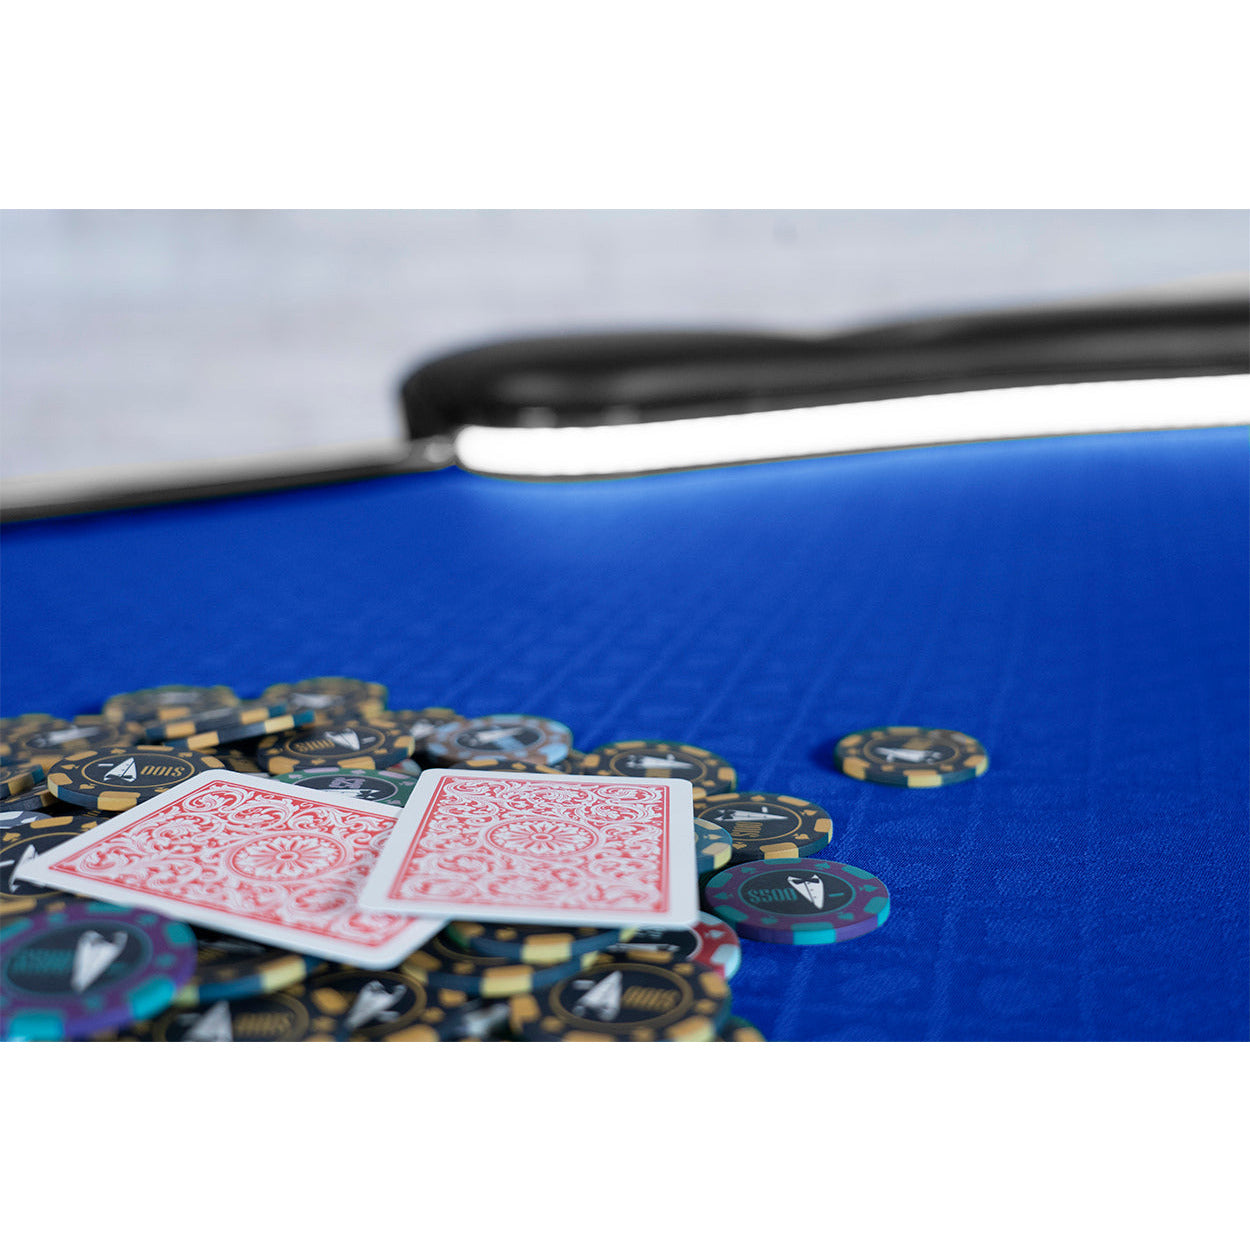 BBO The Aces Pro Alpha Folding Poker Table blue speedcloth close up of cards and chips 